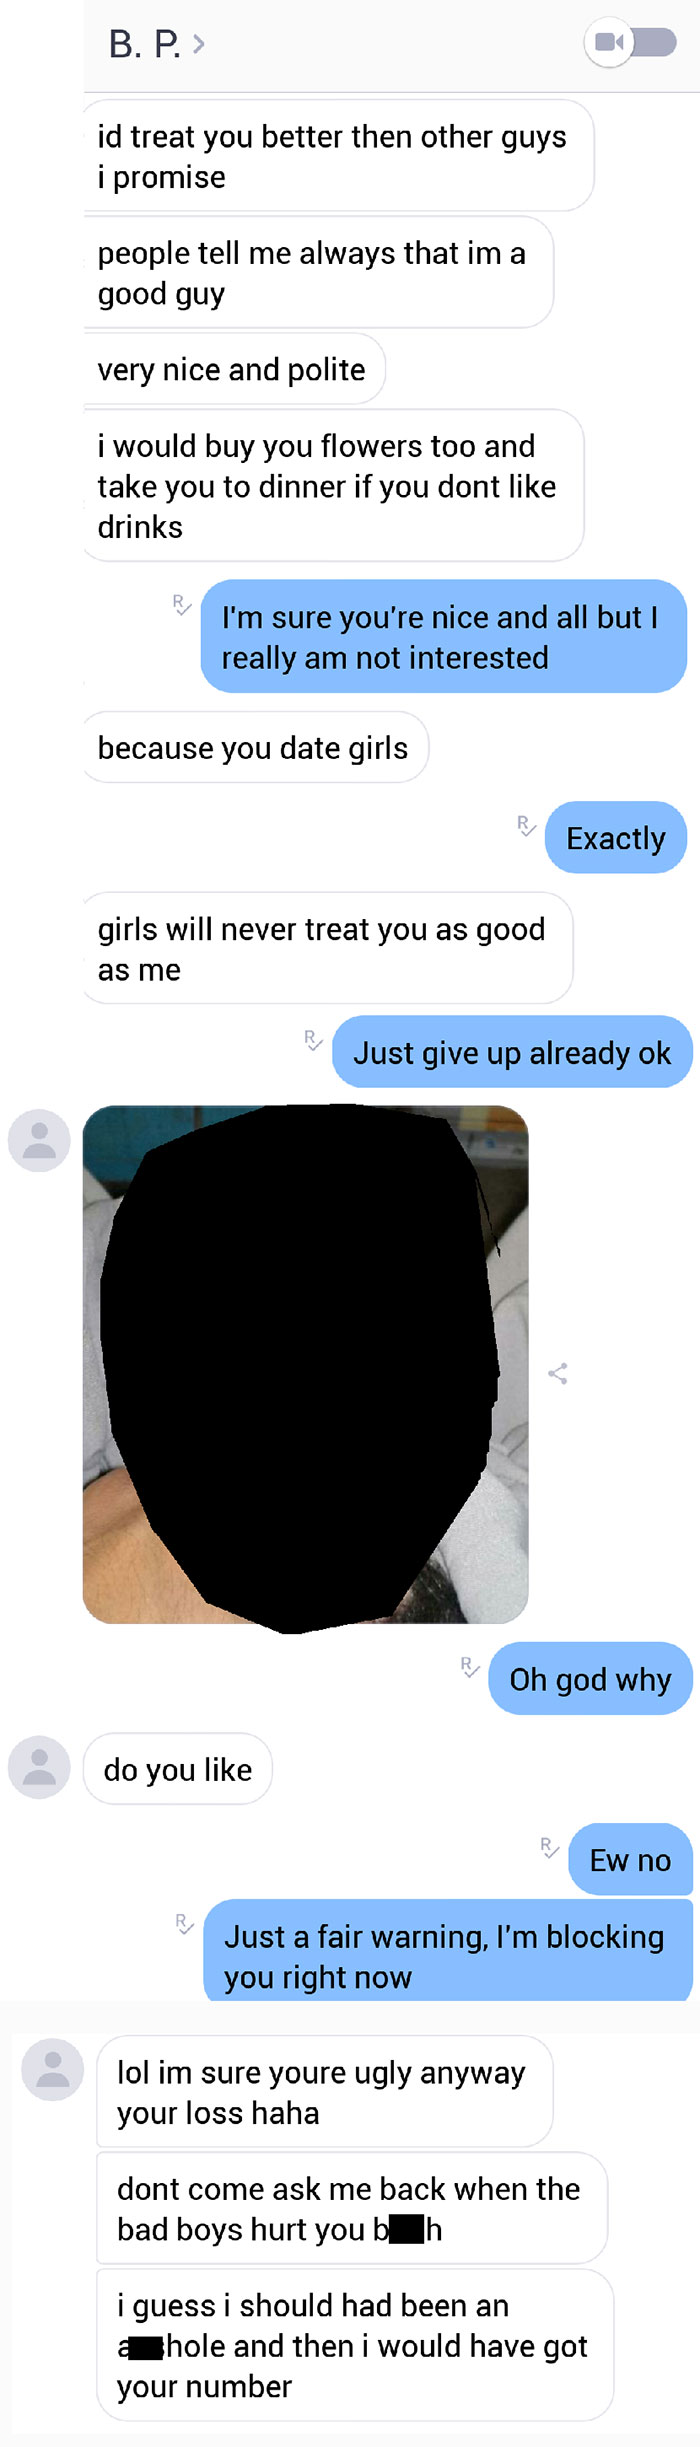 He Kept Asking Me On A Date Even After I Told Him I'm A Lesbian